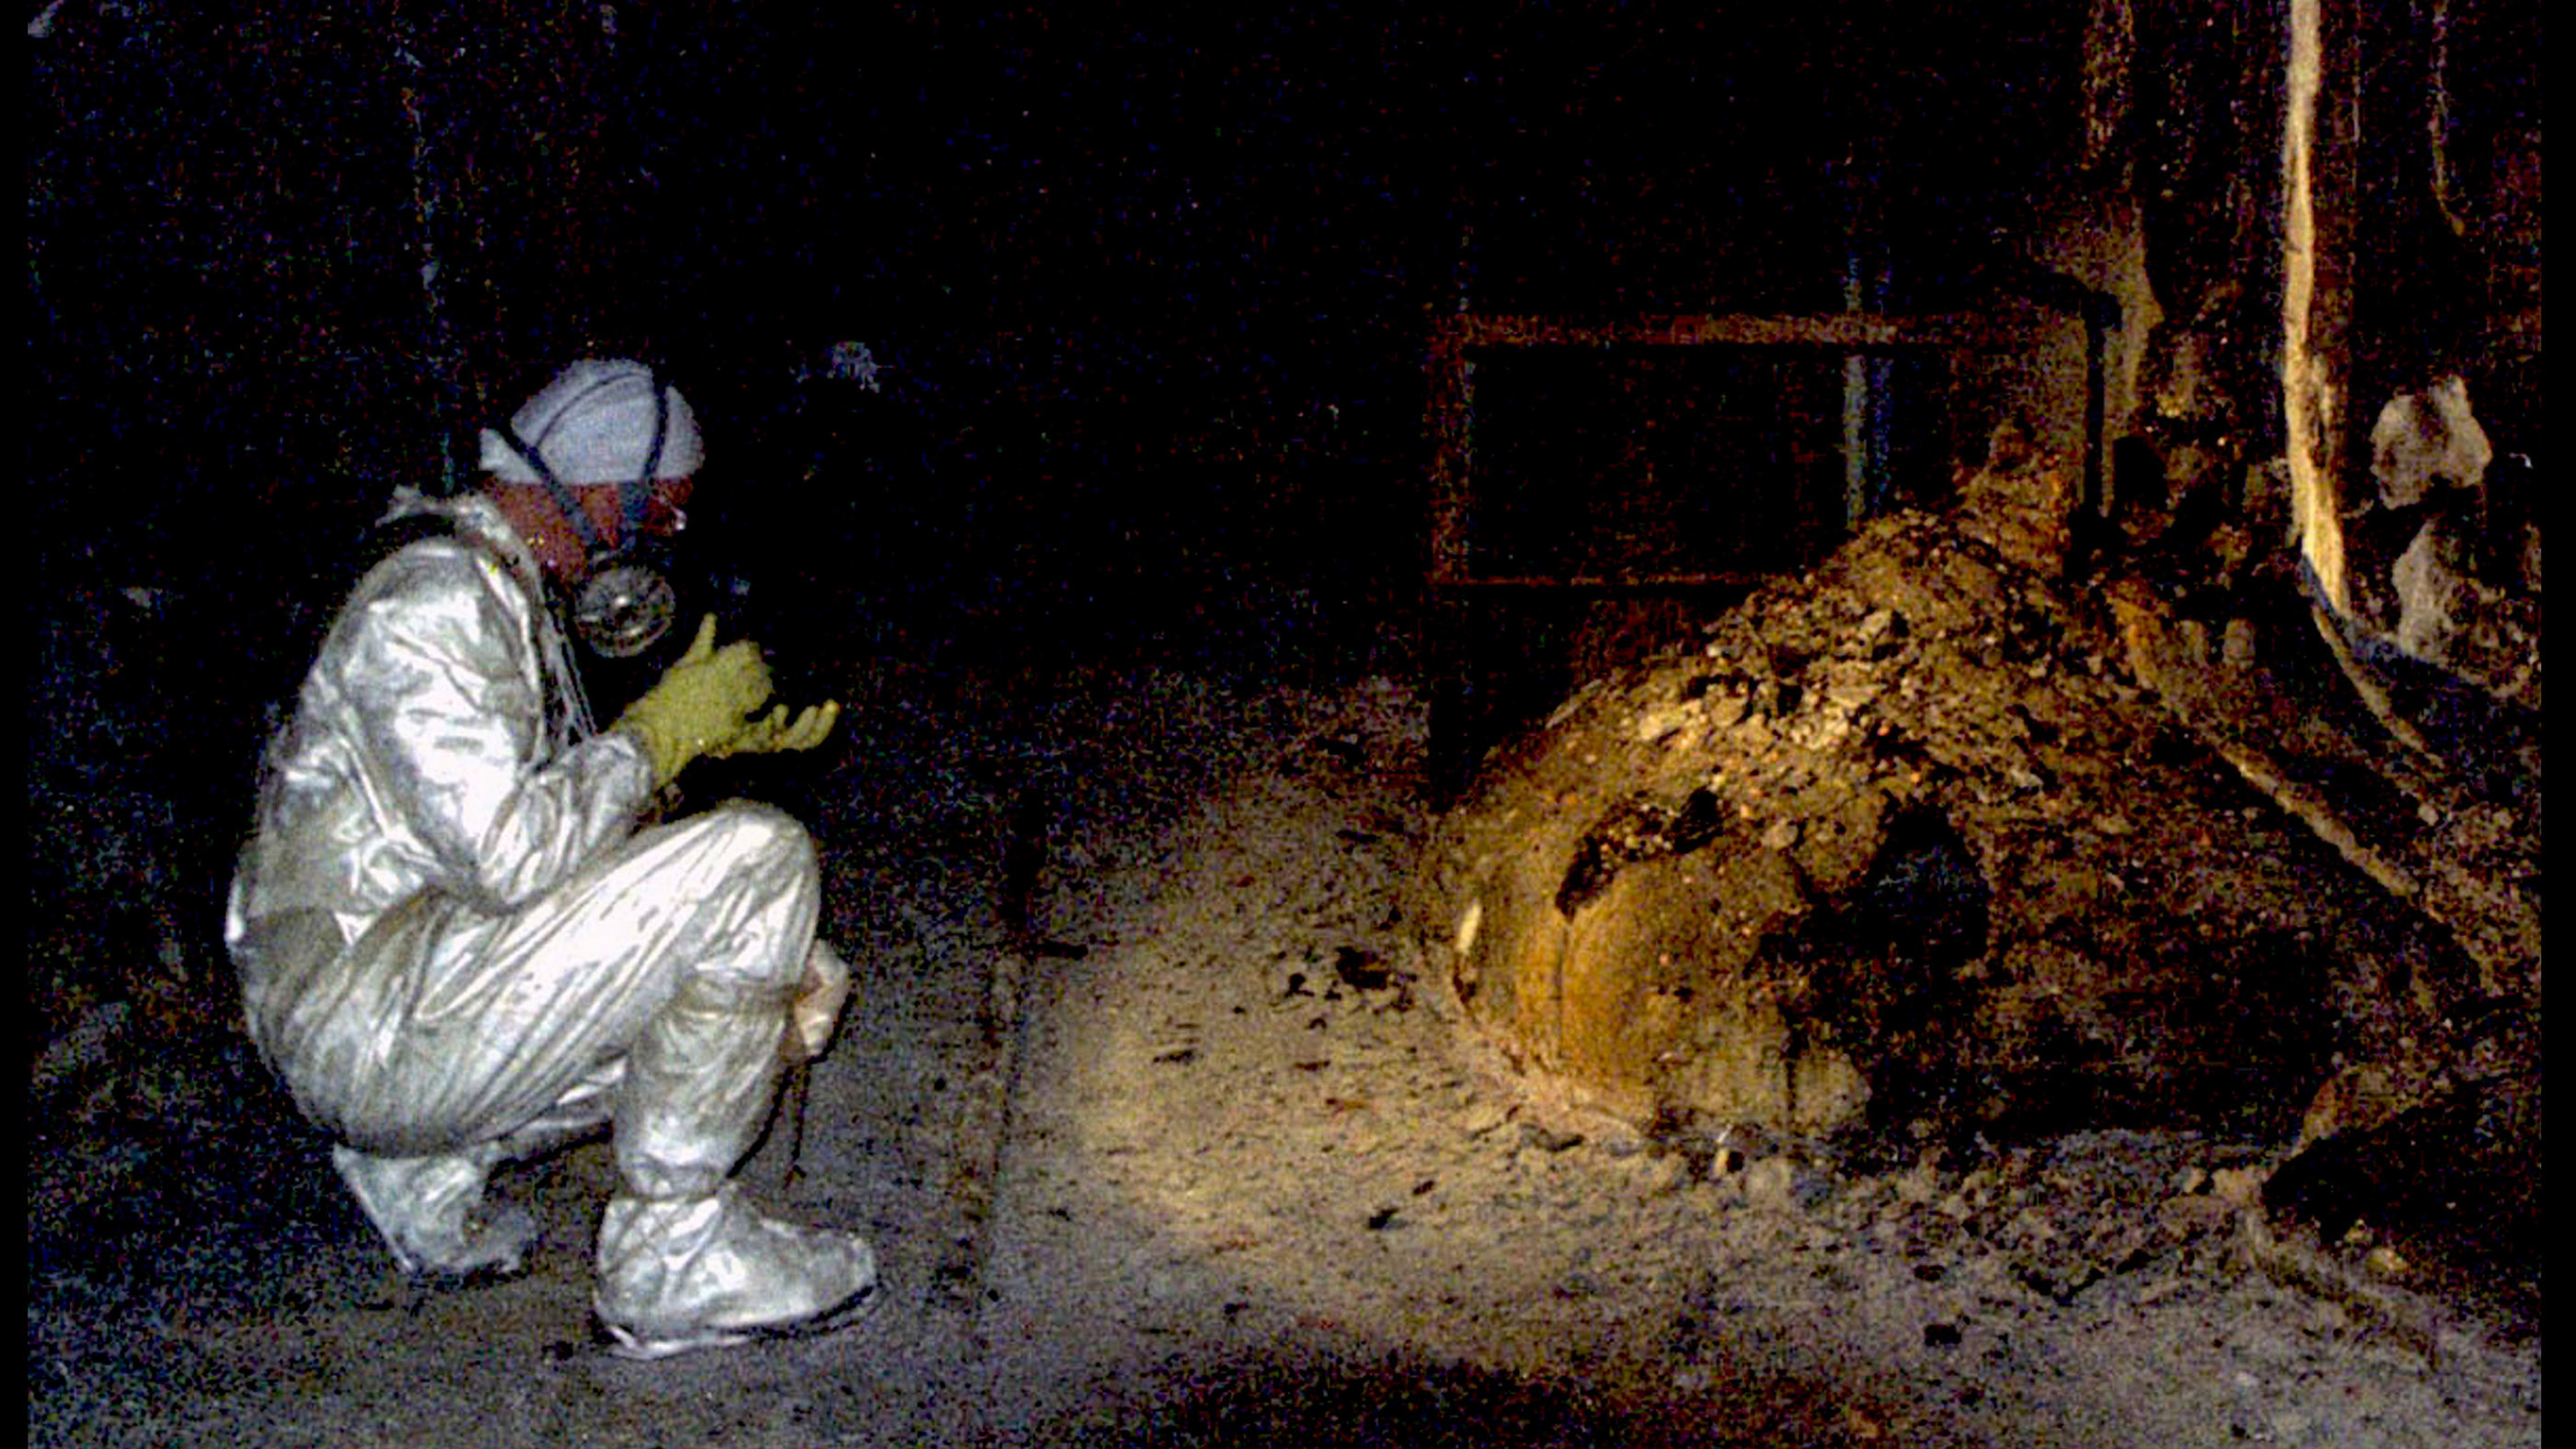 At Chernobyl, this so-called "elephant's foot" is a solid mass of melted nuclear fuel mixed with concrete, sand and core sealing material that the fuel had melted through. The blob is located in a basement area under the original location of the plant's core.